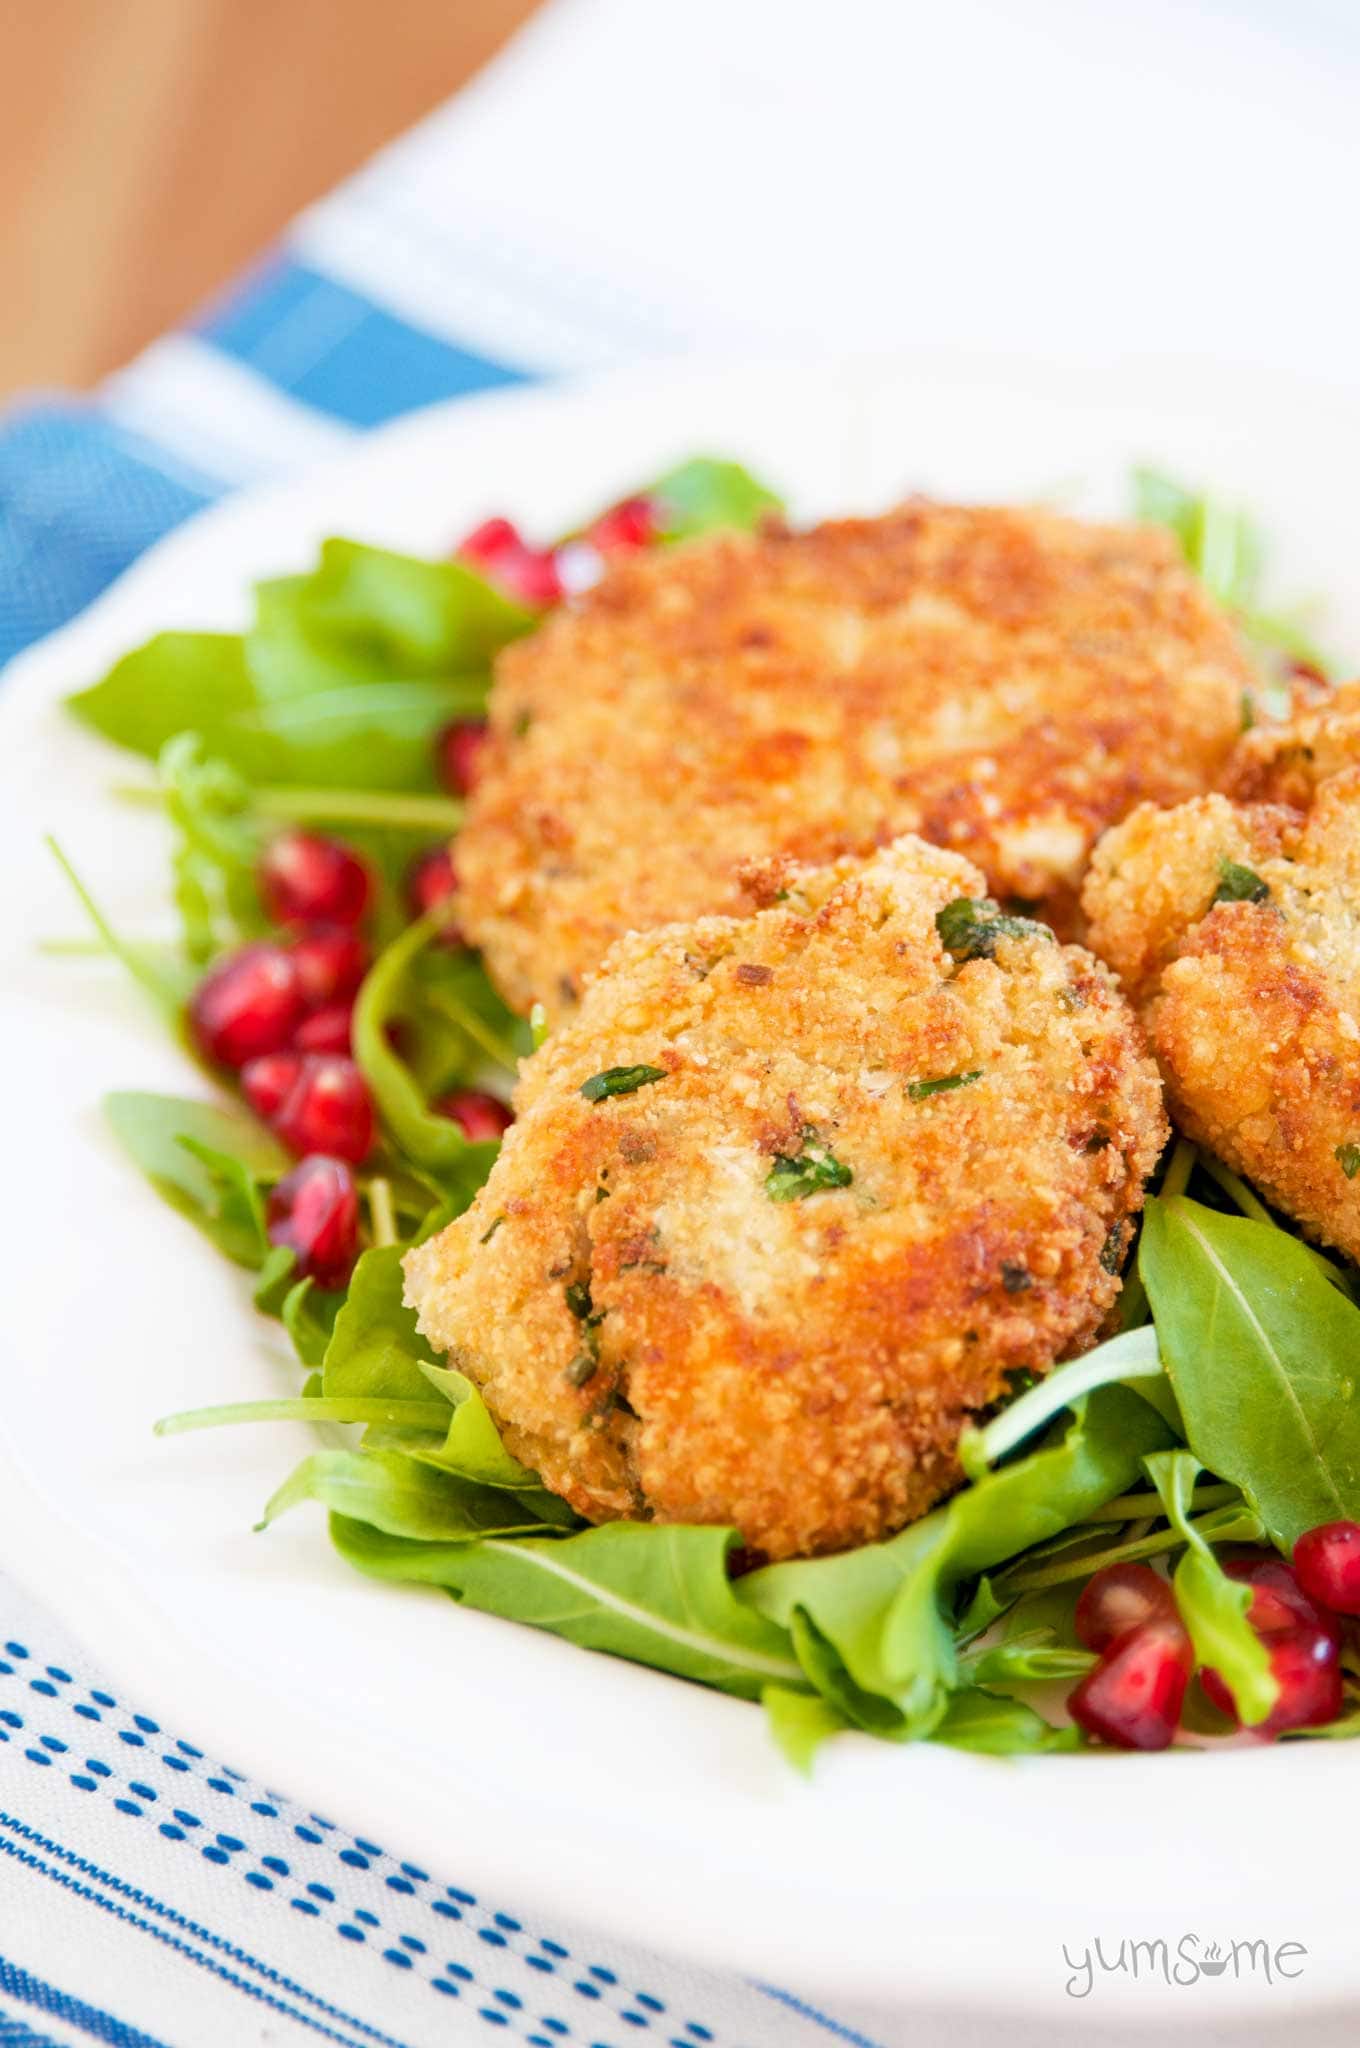 A plate of Easy Vegan Quinoa and Cheese Patties on lettuce leaves.